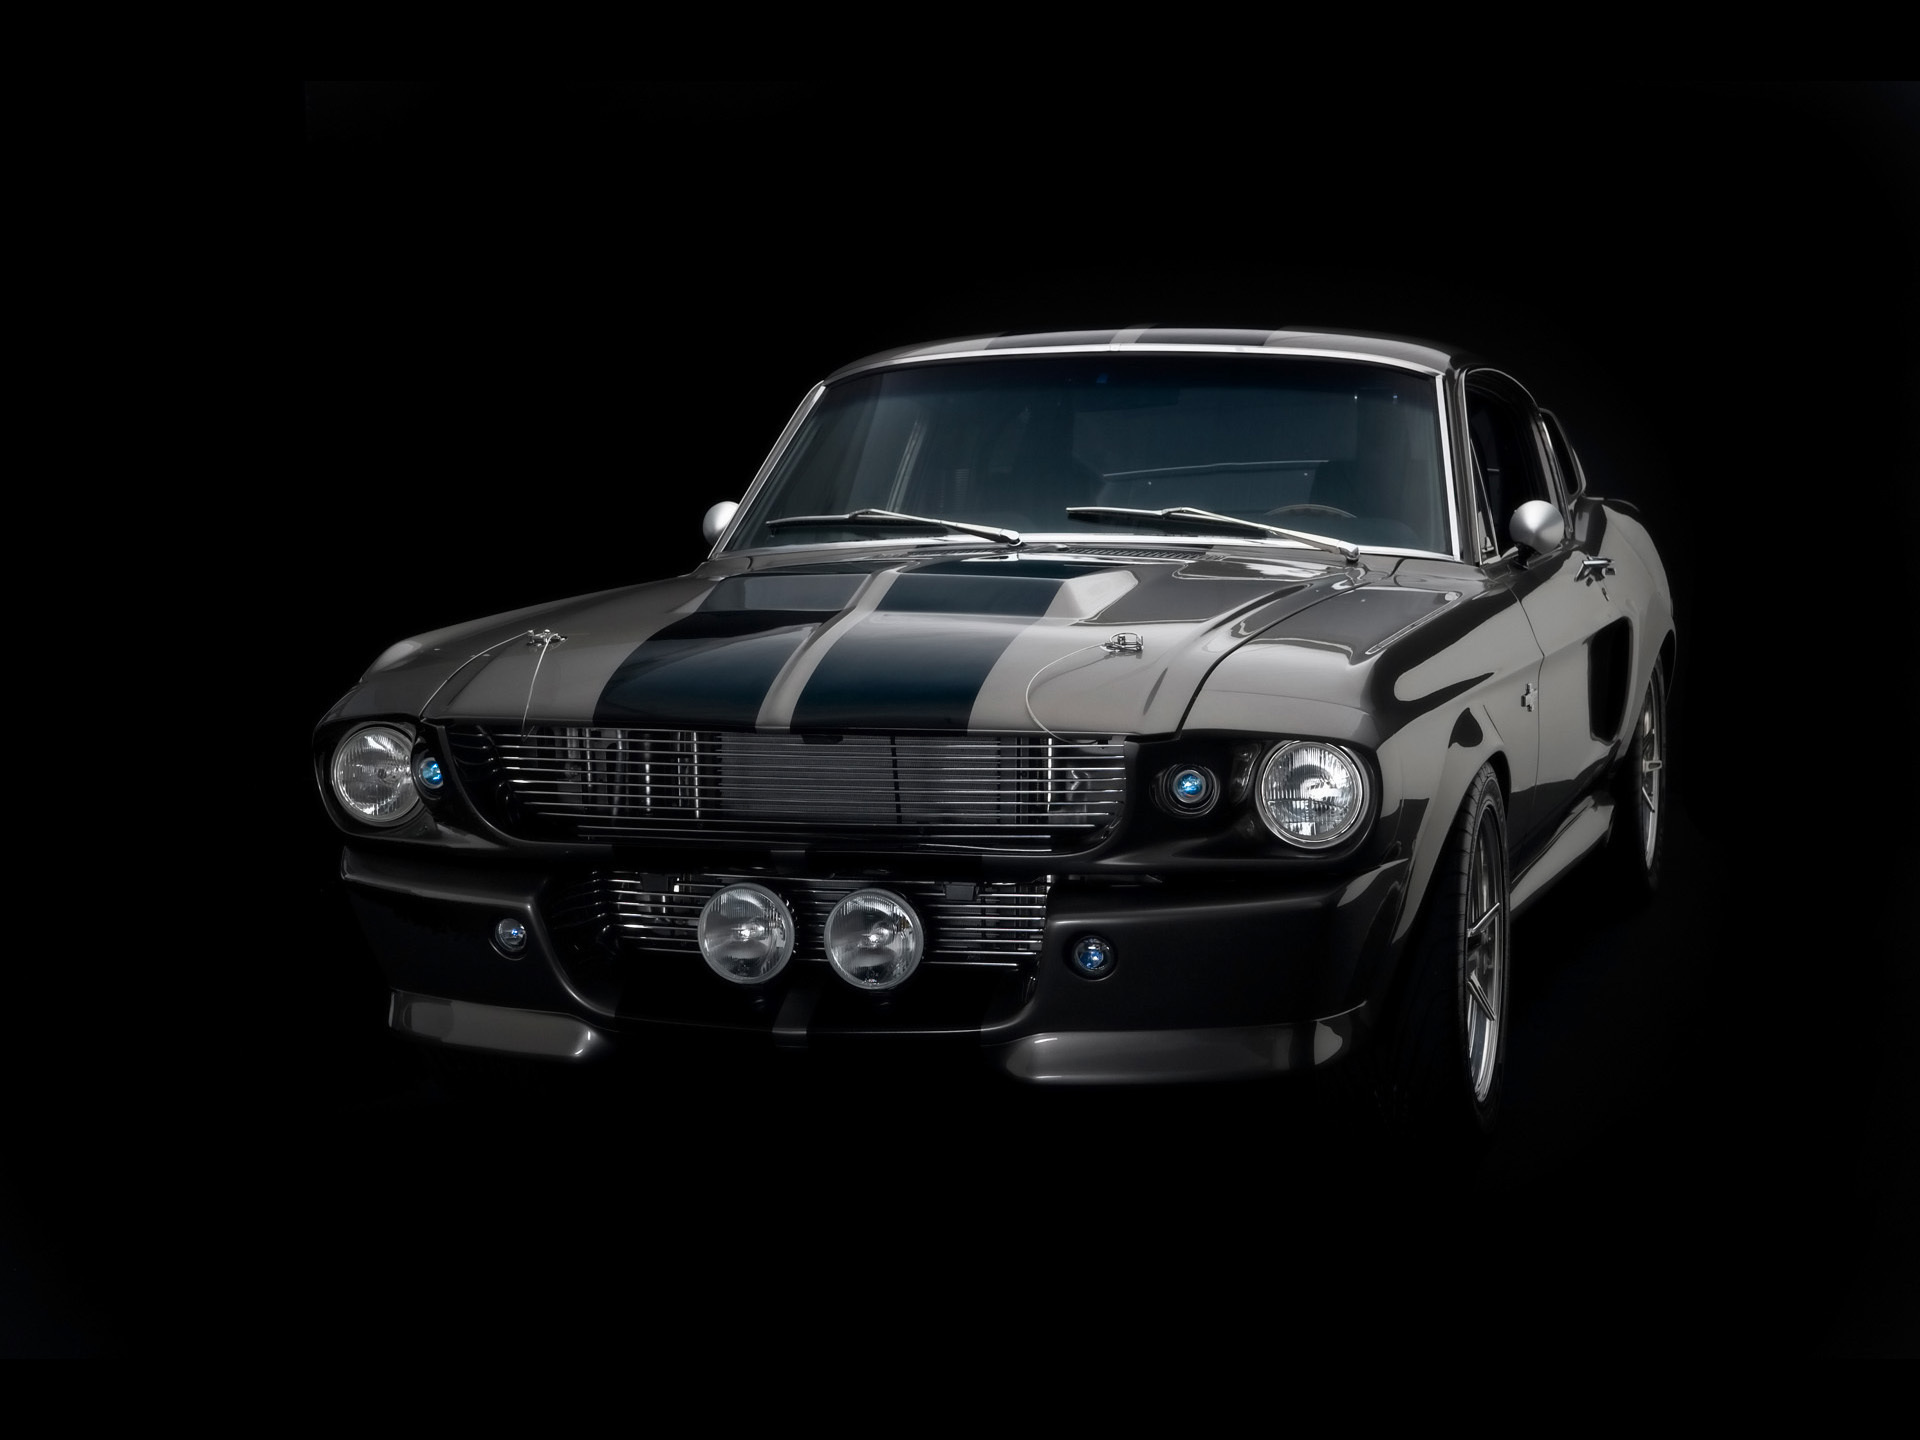 Shelby GT500, High-performance machine, Mustang muscle prowess, Iconic vehicle, Automotive excellence, 1920x1440 HD Desktop